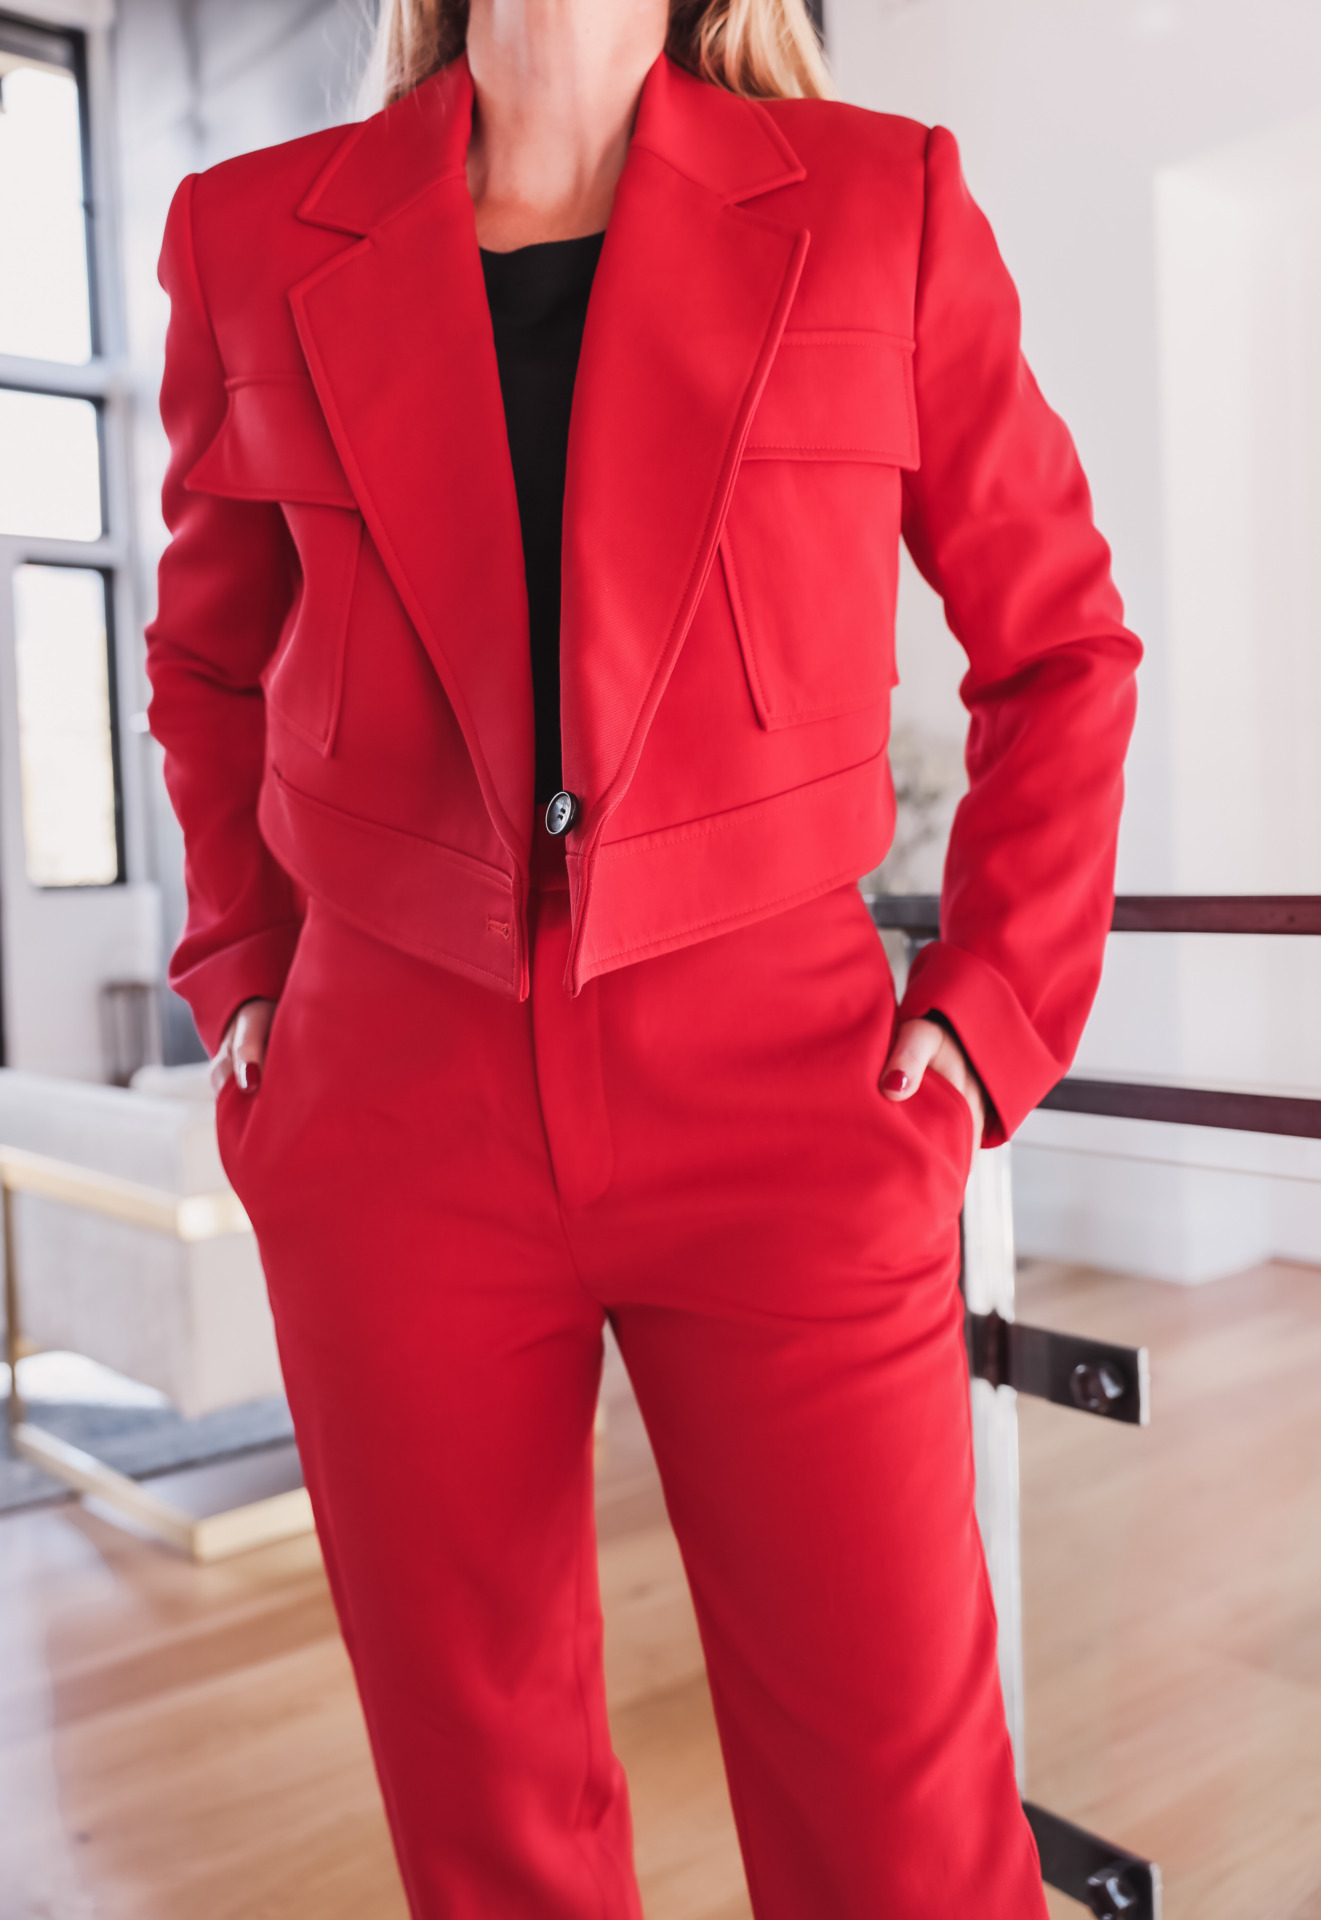 red alc jacket and pants Shopbop Sale Style Event